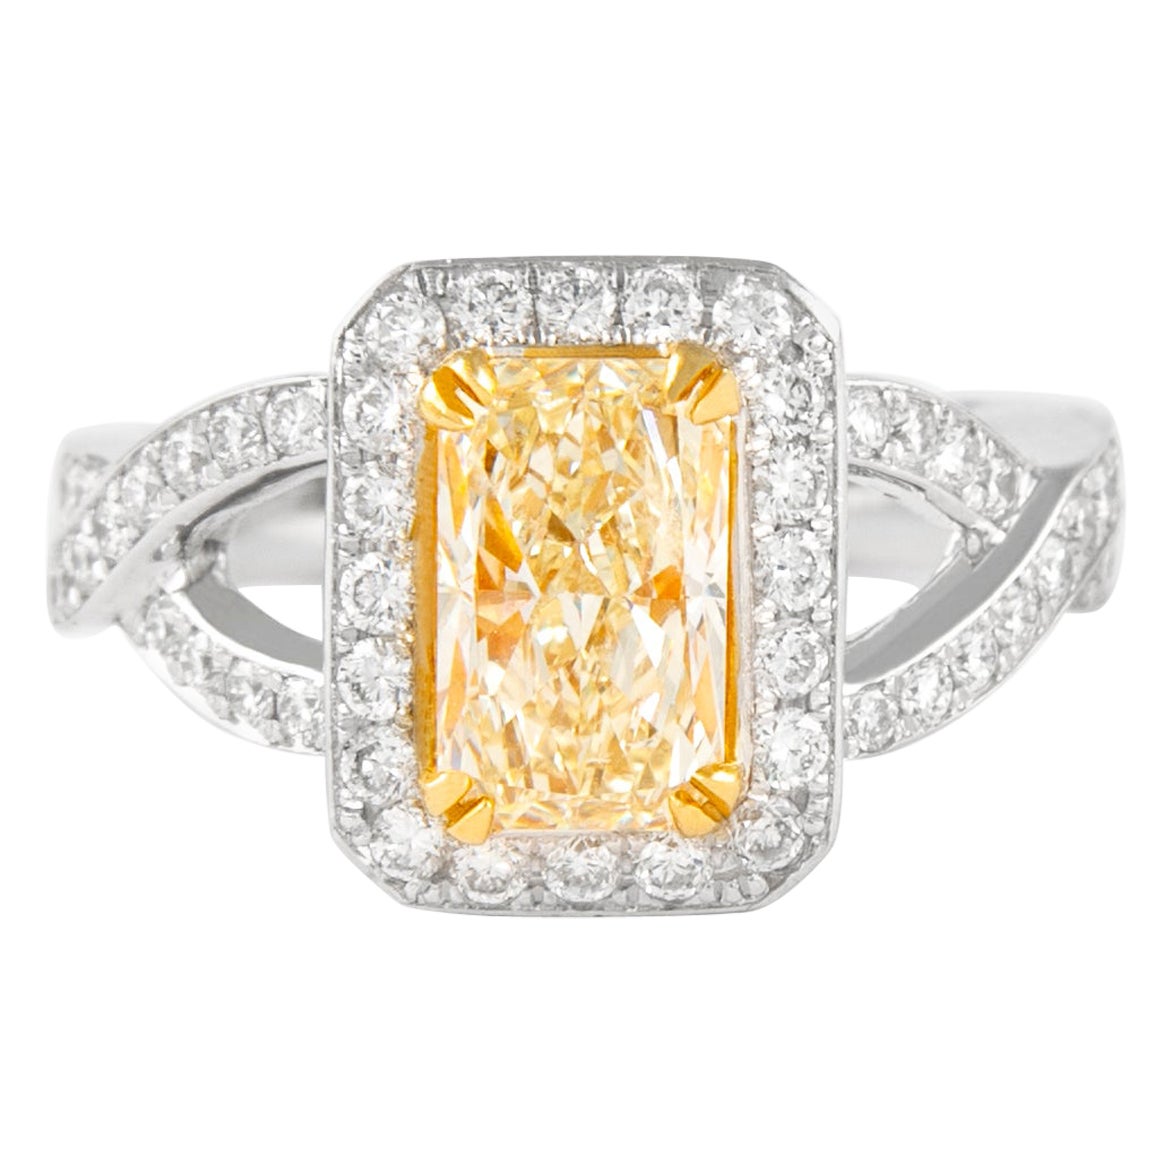 Alexander 2.30ctt Fancy Yellow VS1 Radiant Diamond with Halo Ring 18k Two Tone